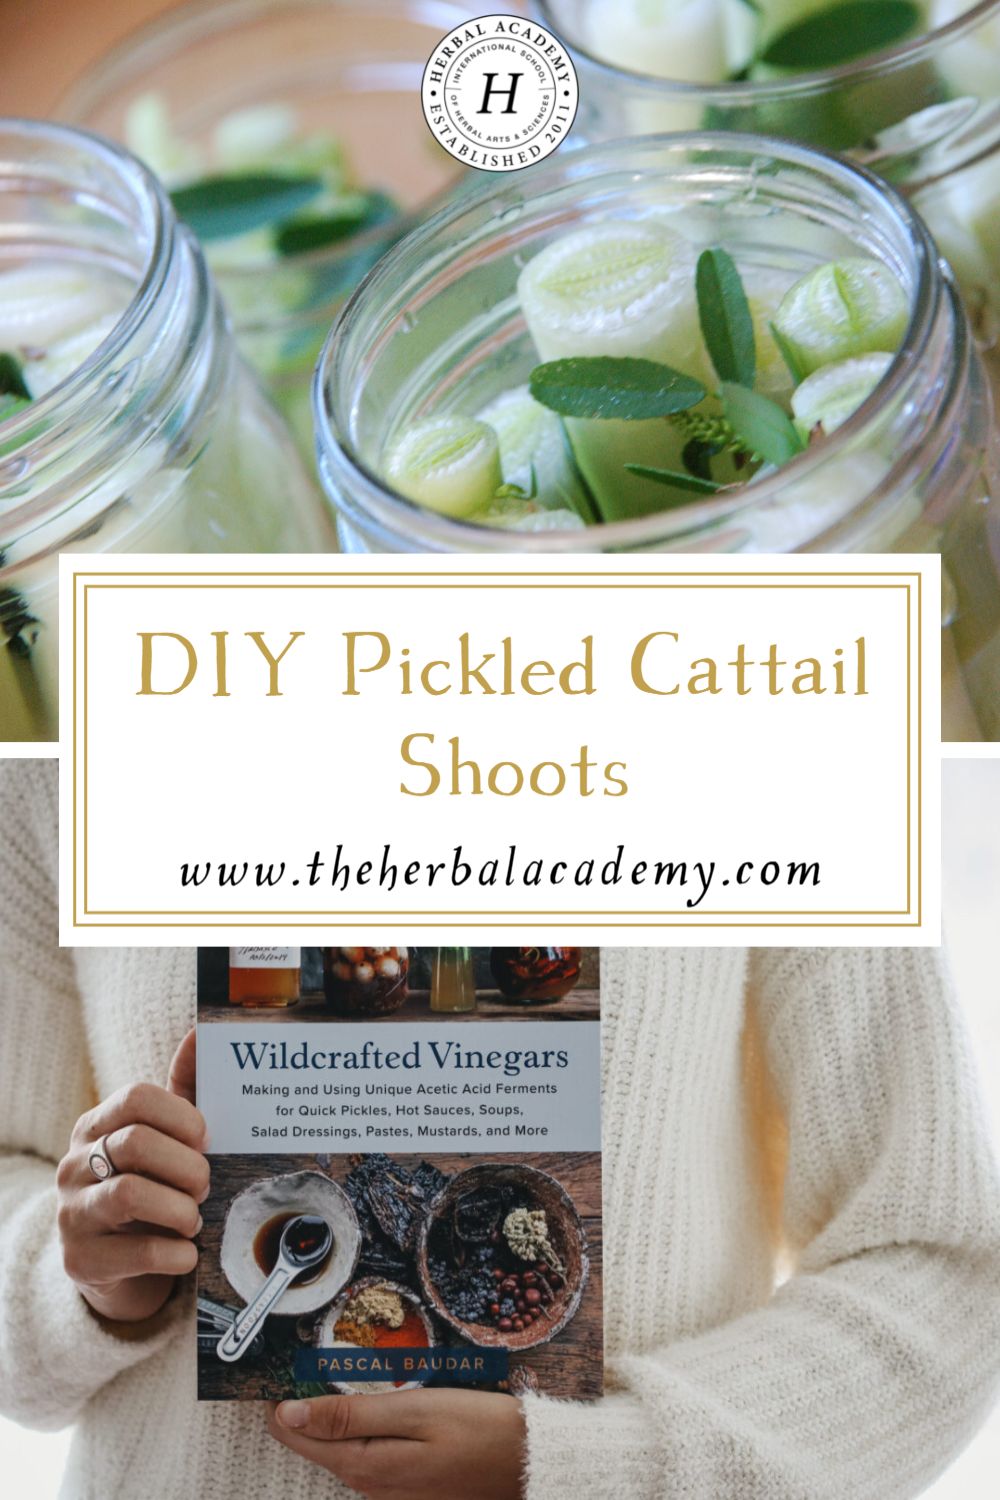 DIY Pickled Cattail Shoots | Herbal Academy | Enjoy this basic recipe for Pickled Cattail Shoots taken from the book, Wildcrafted Vinegars by Pascal Baudar.